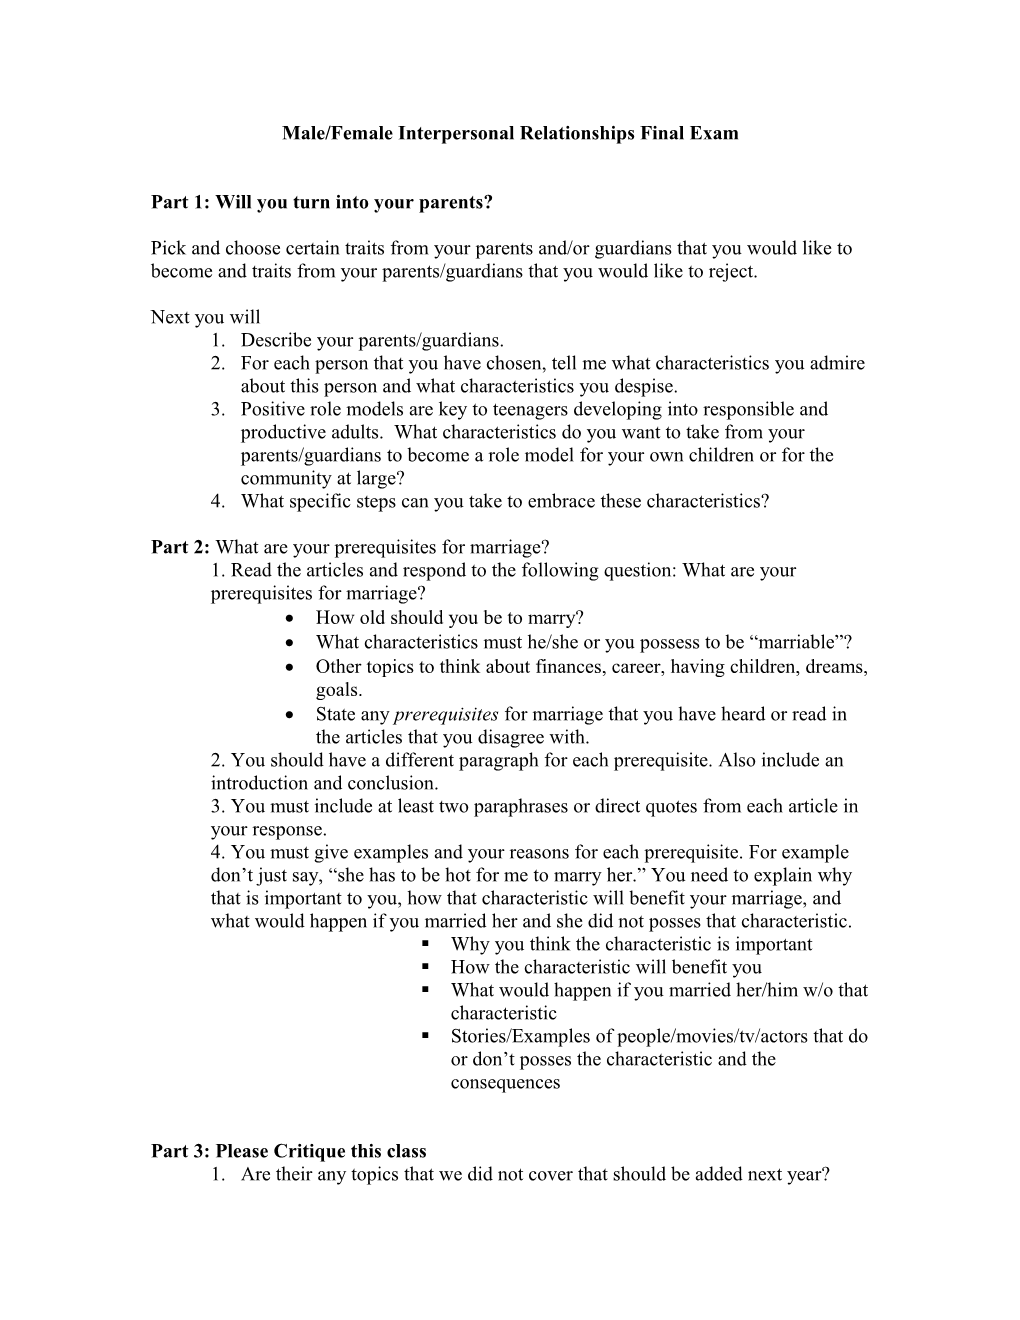 Male/Female Interpersonal Relationships Final Exam